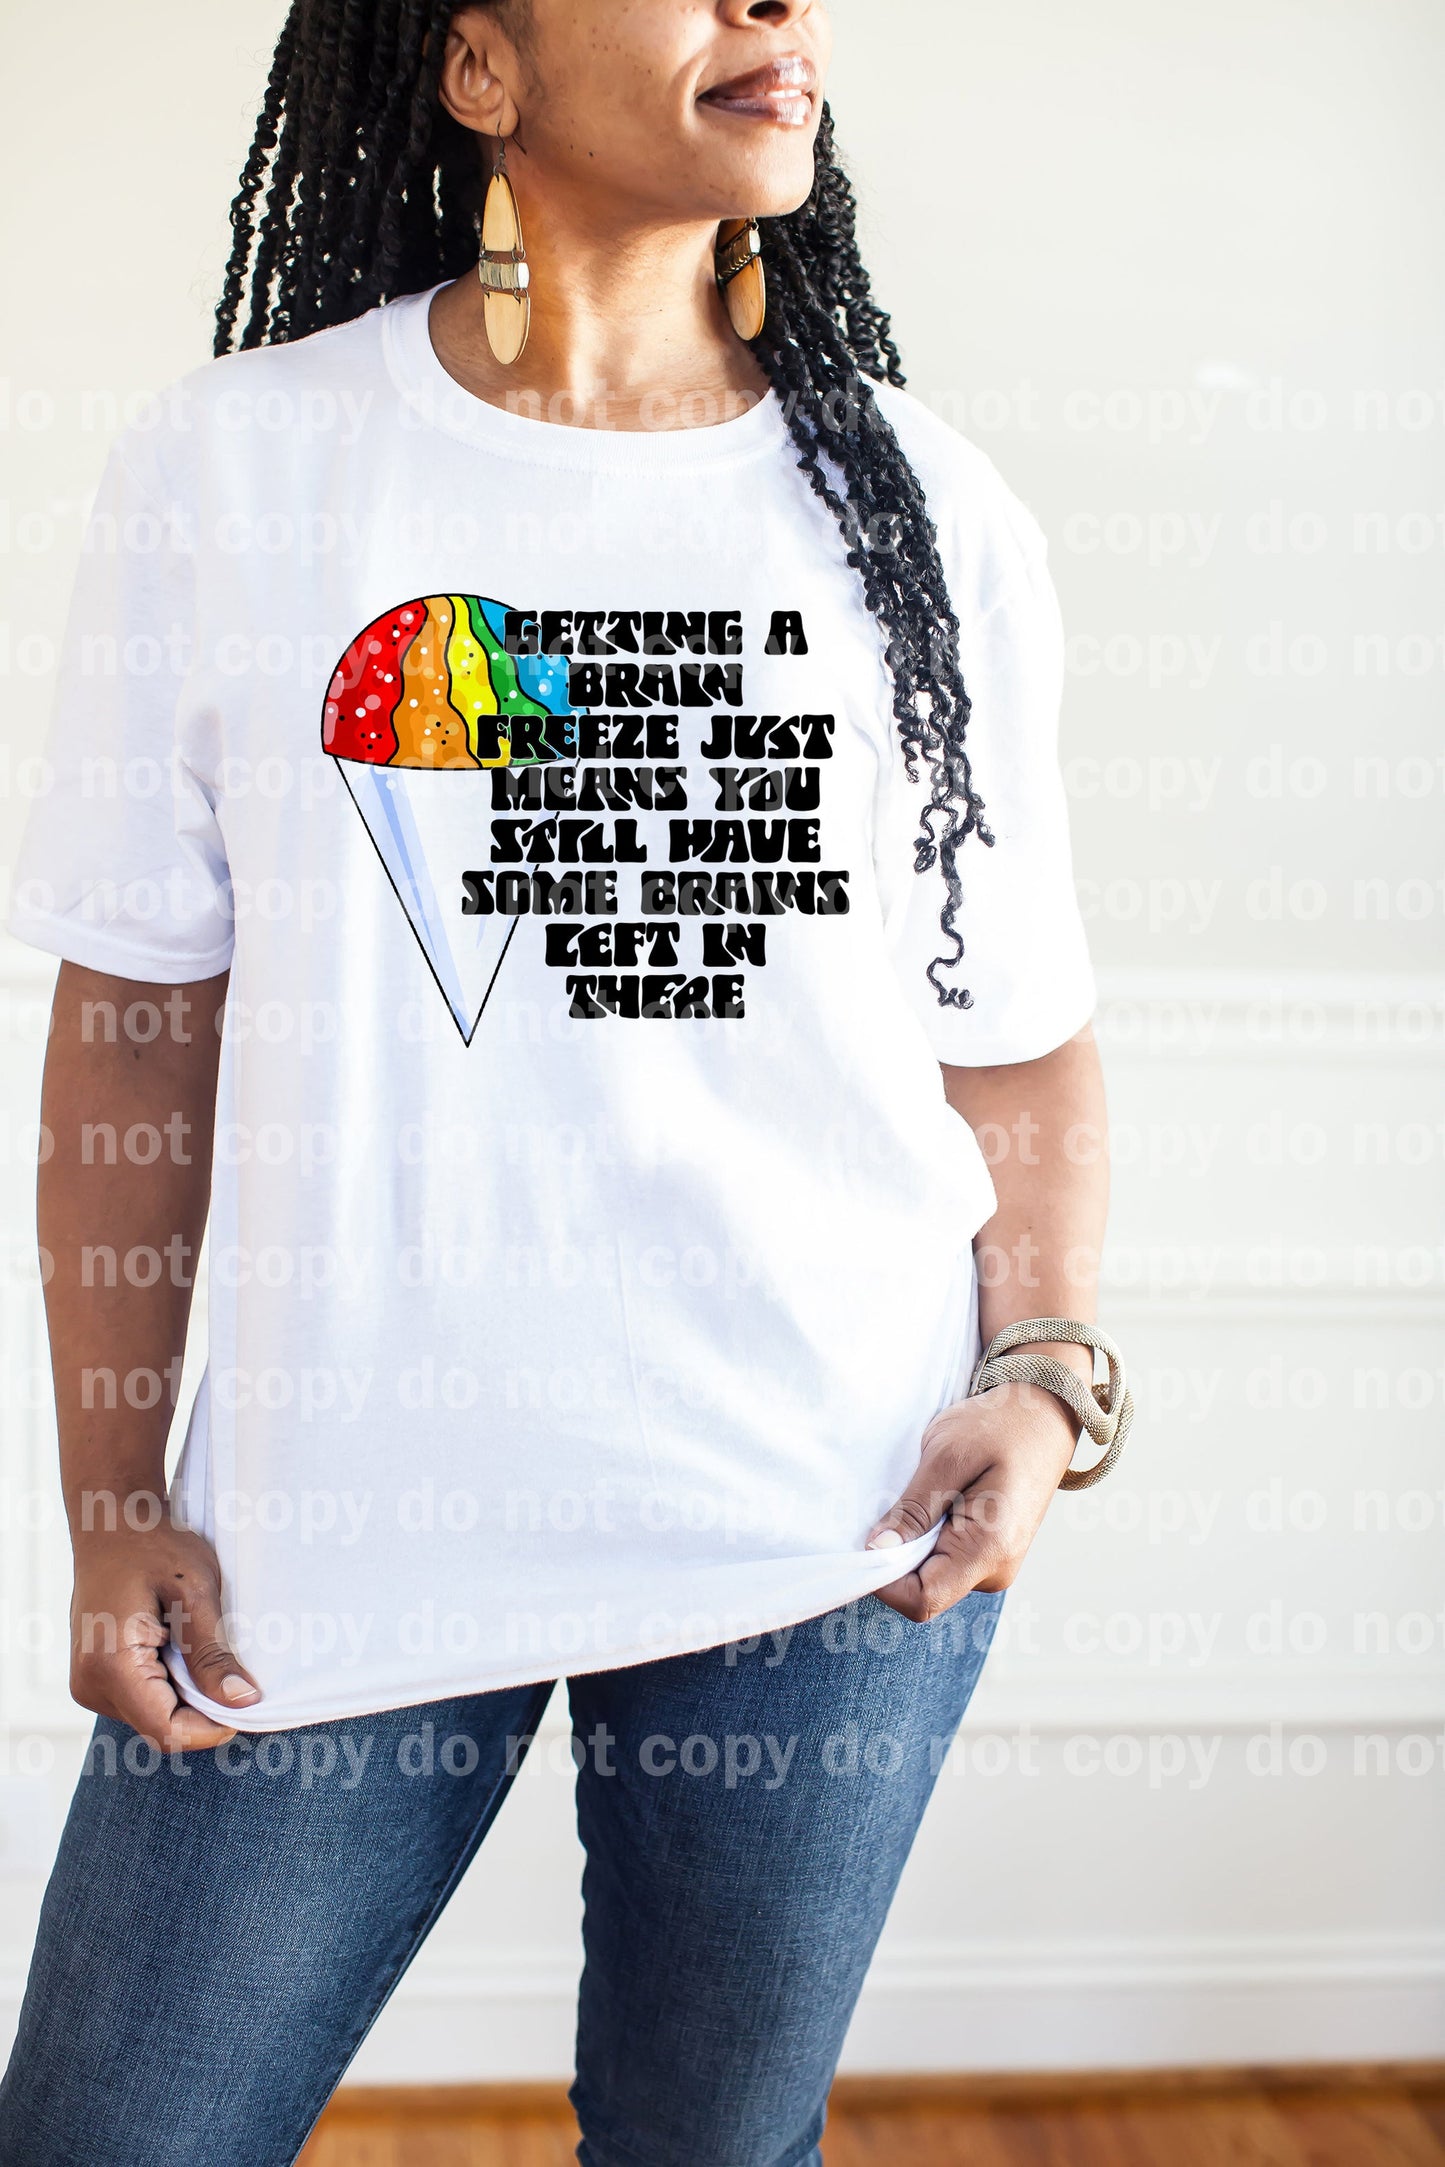 Getting A Brain Freeze Just Means You Still Have Some Brains Left In There Dream Print or Sublimation Print